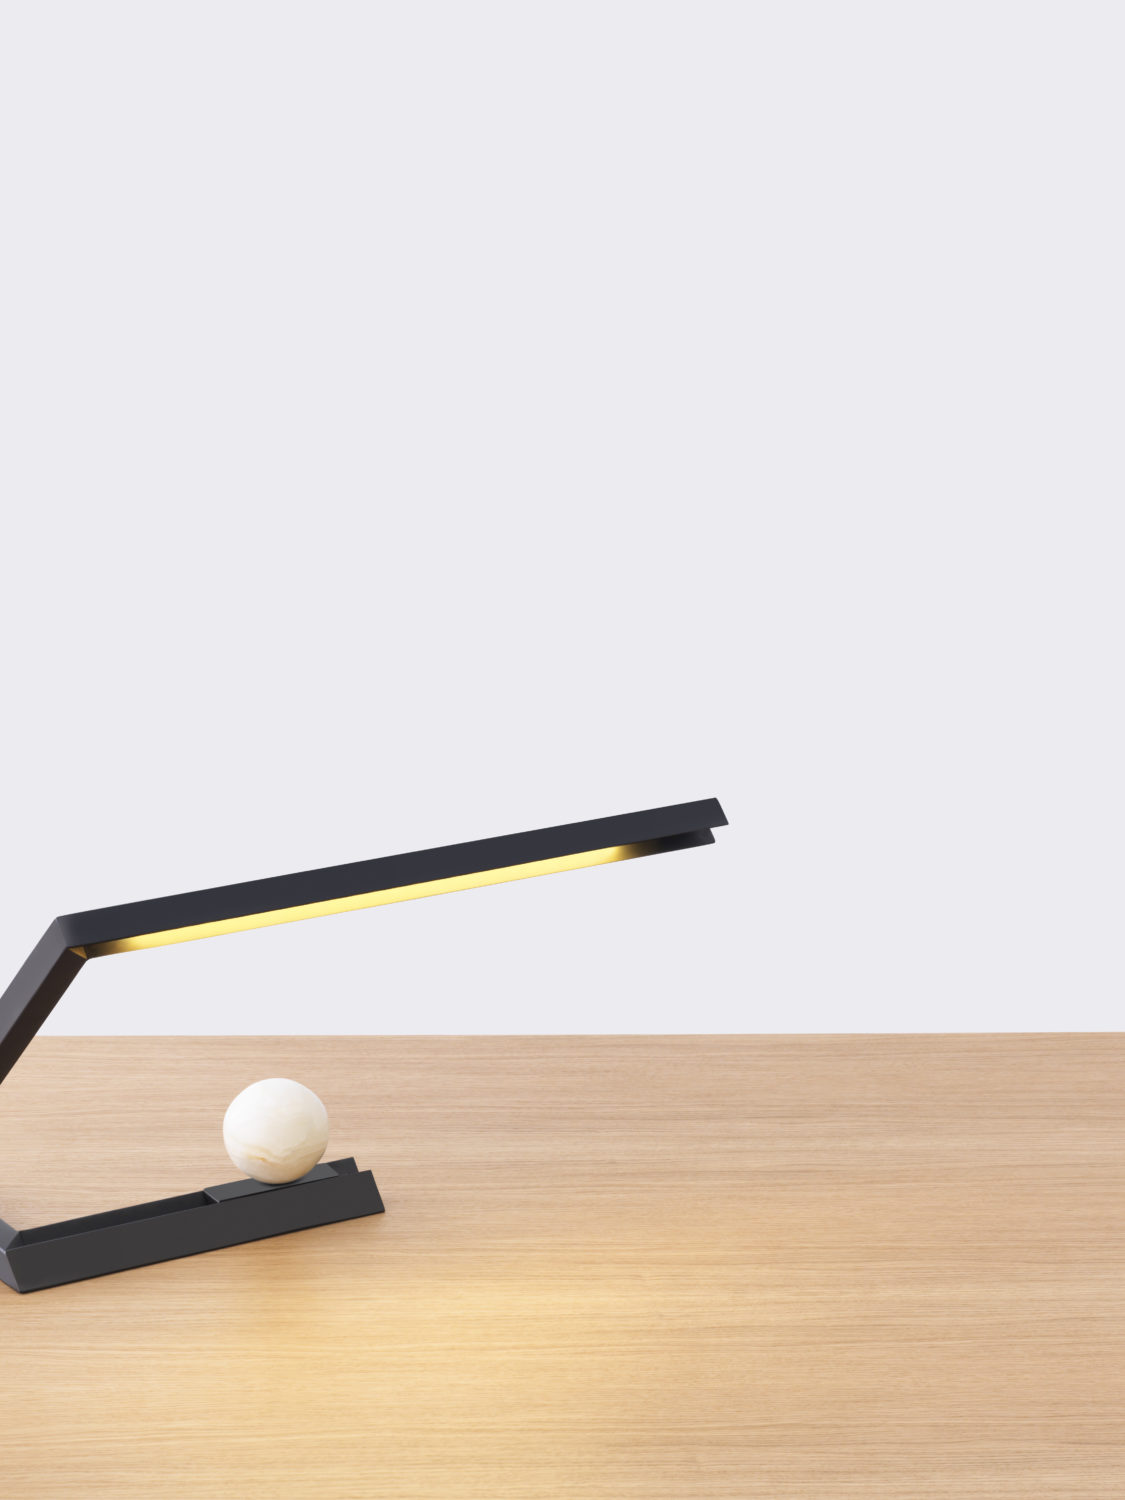 Resident Oud Table Light Black By Nat Cheshire 2